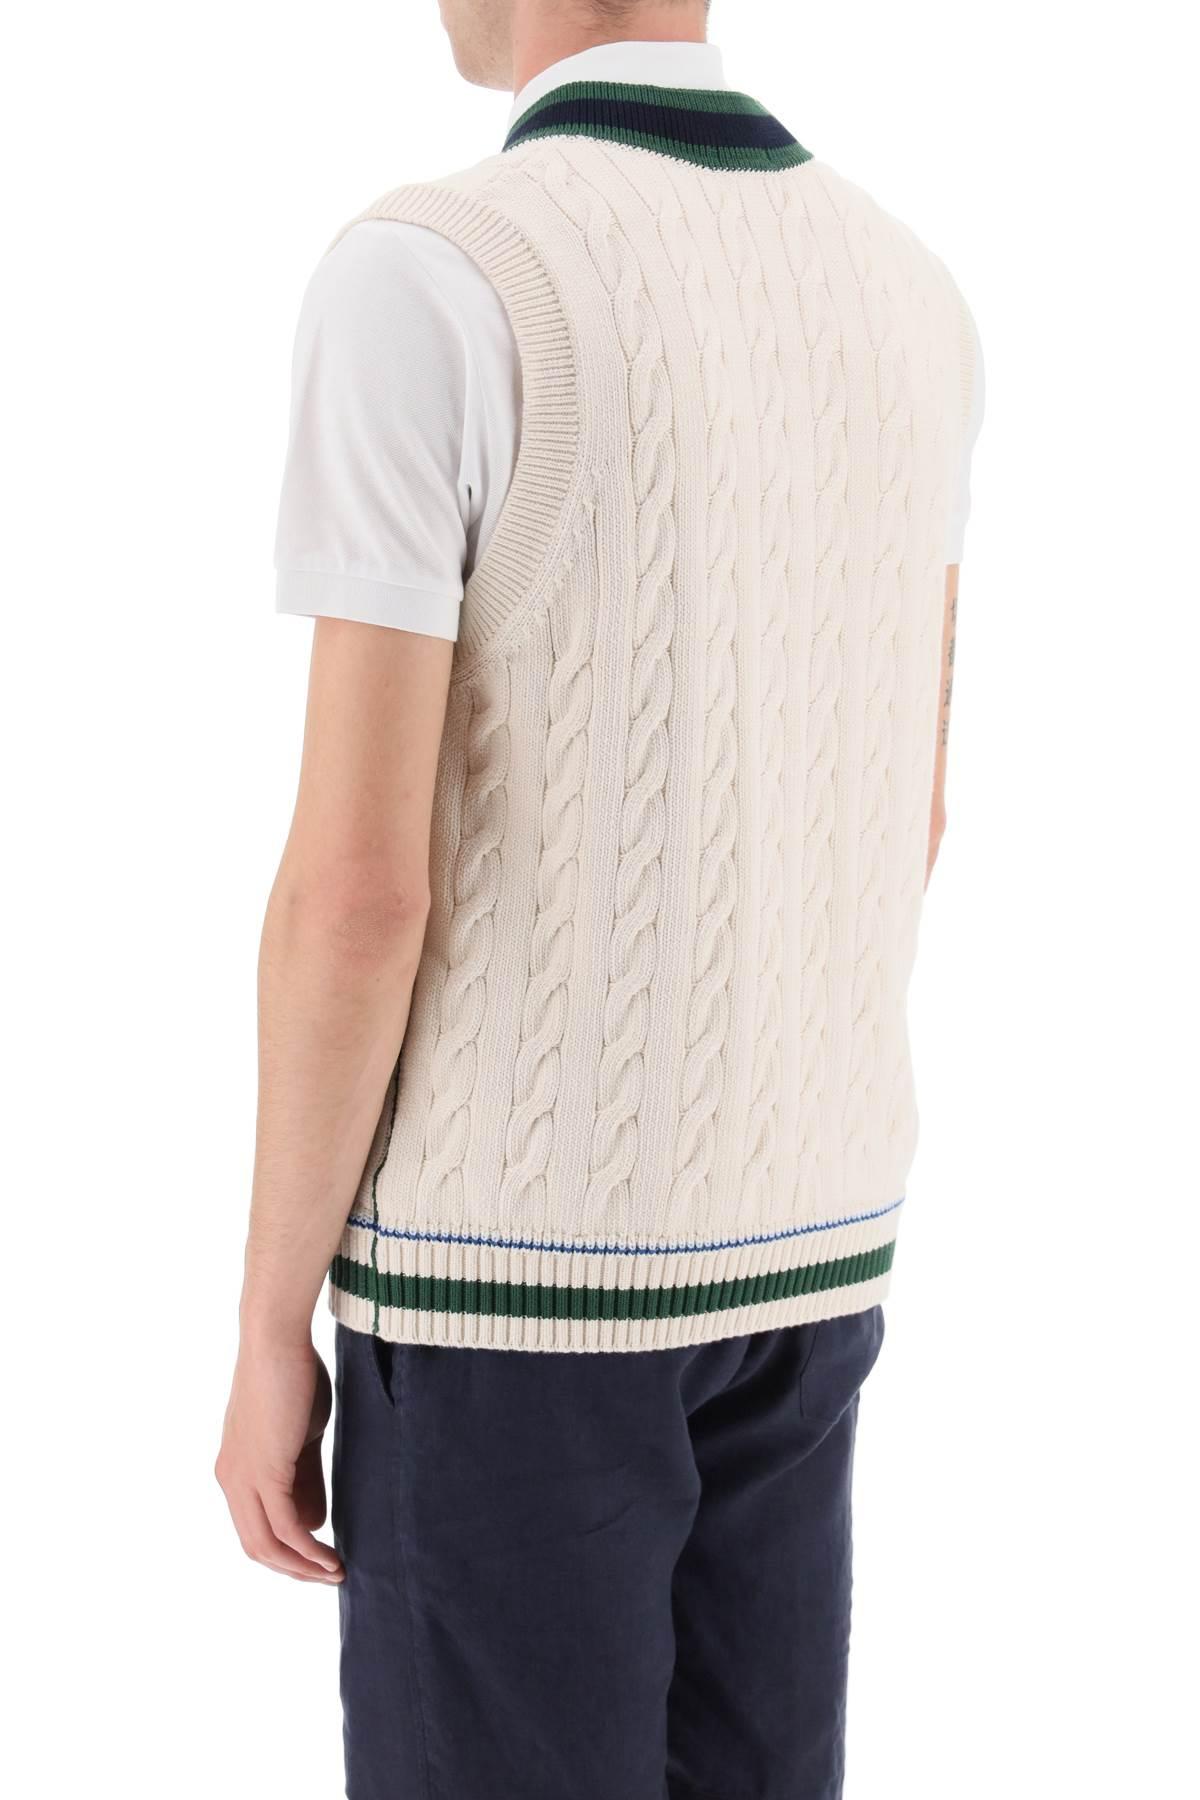 Unisex Cable Knit Sweater Vest in Organic Cotton - Men's Sweaters